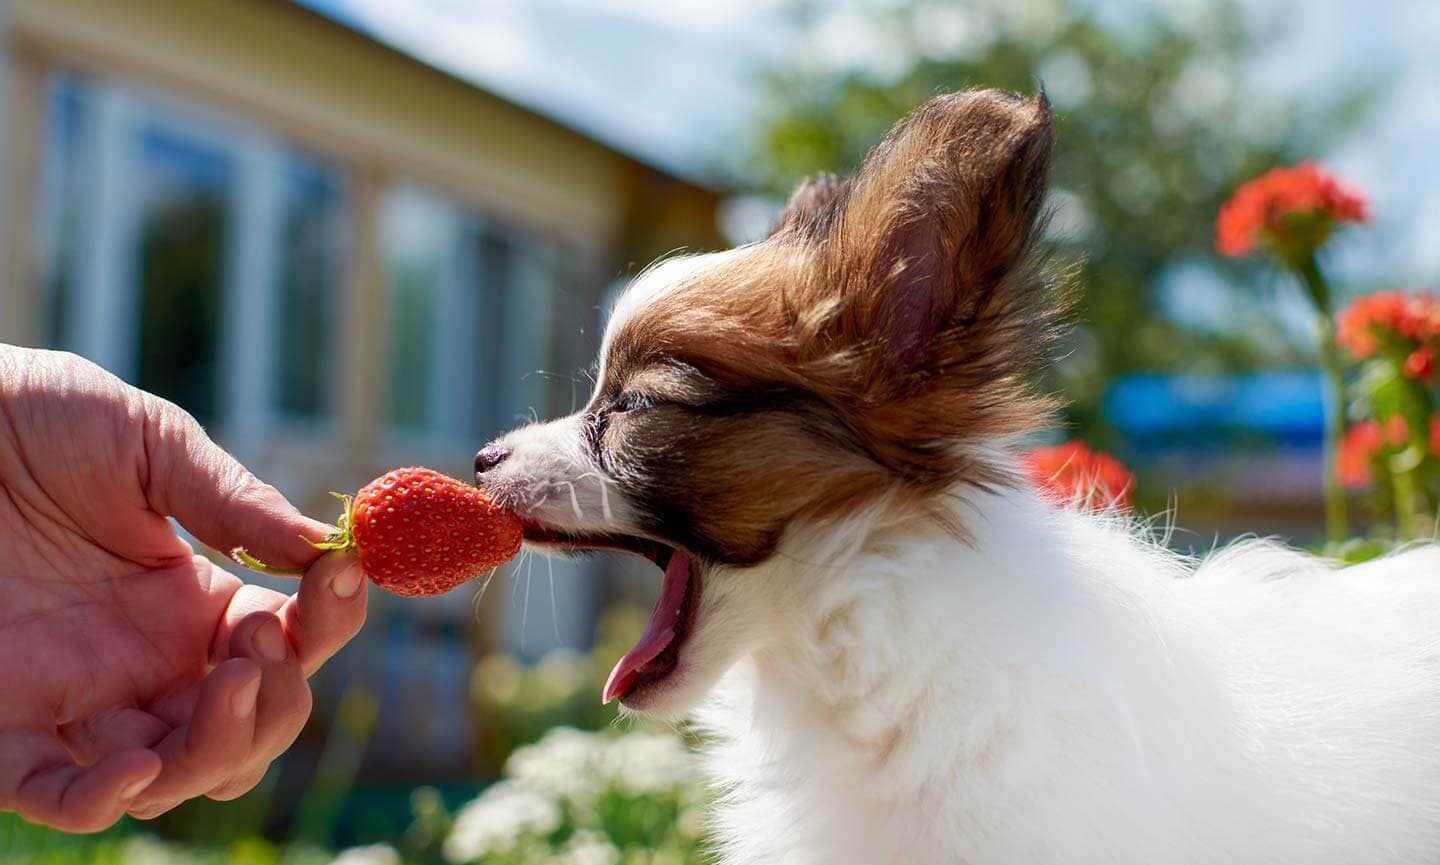 Can dogs eat frozen strawberries?